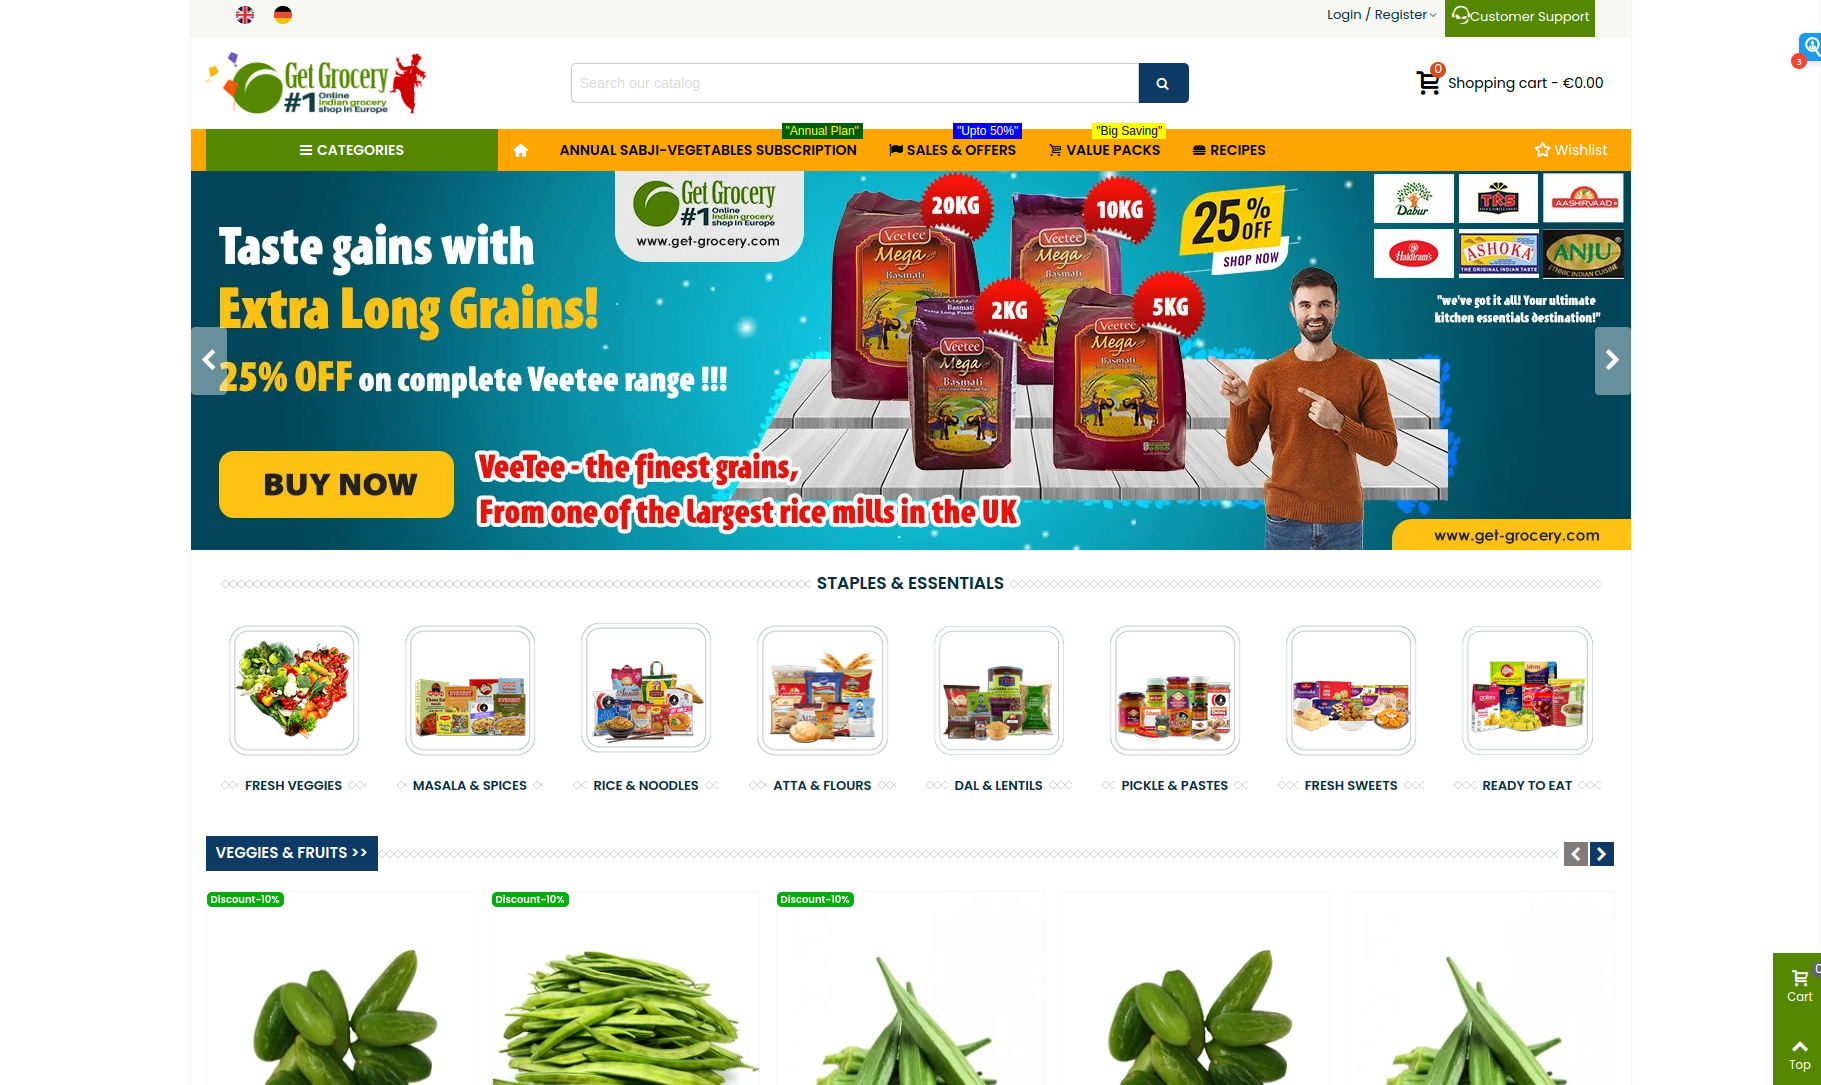 Indian groceries on get grocery (Home page of get-grocery.com)